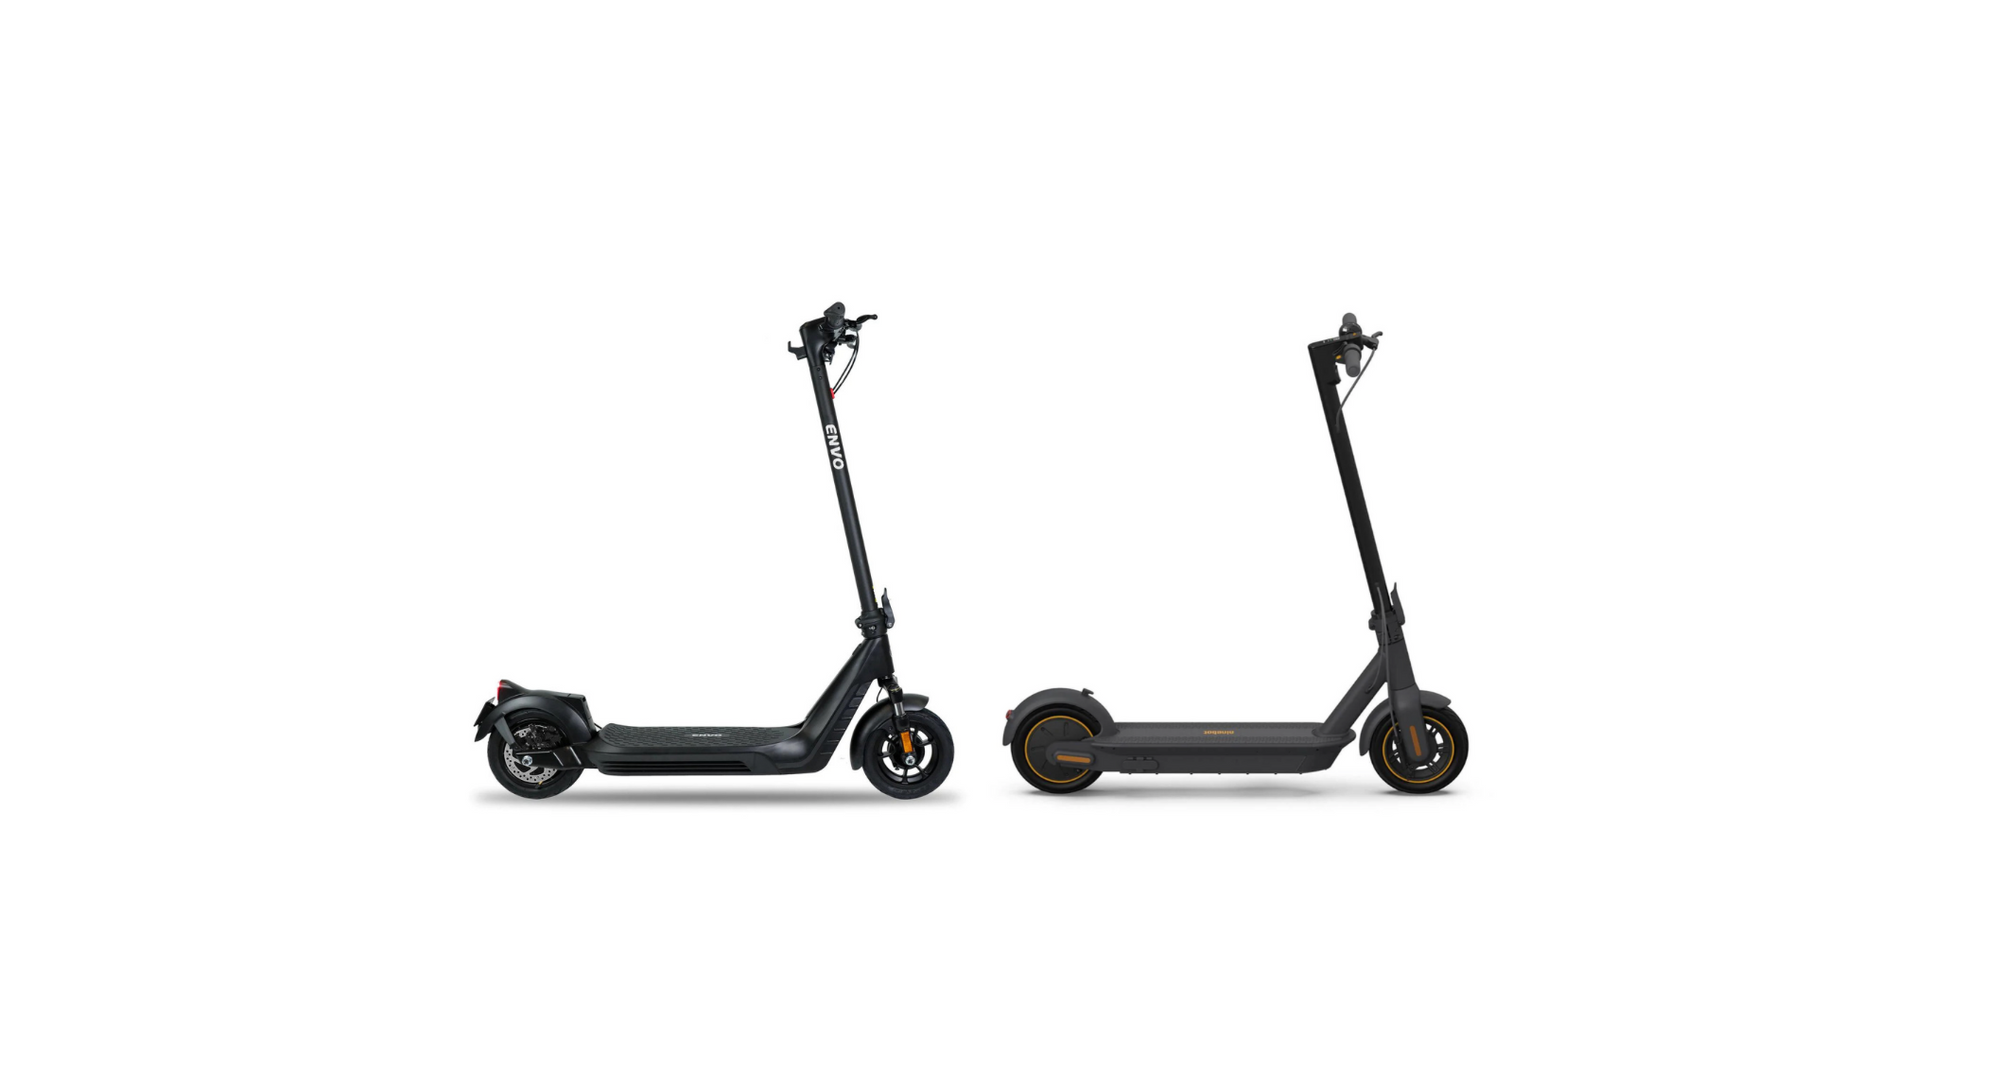 Best Electric Scooter for Commute and Fun: A Comparison of Ninebot Kickscooter Max G30P and ENVO E50